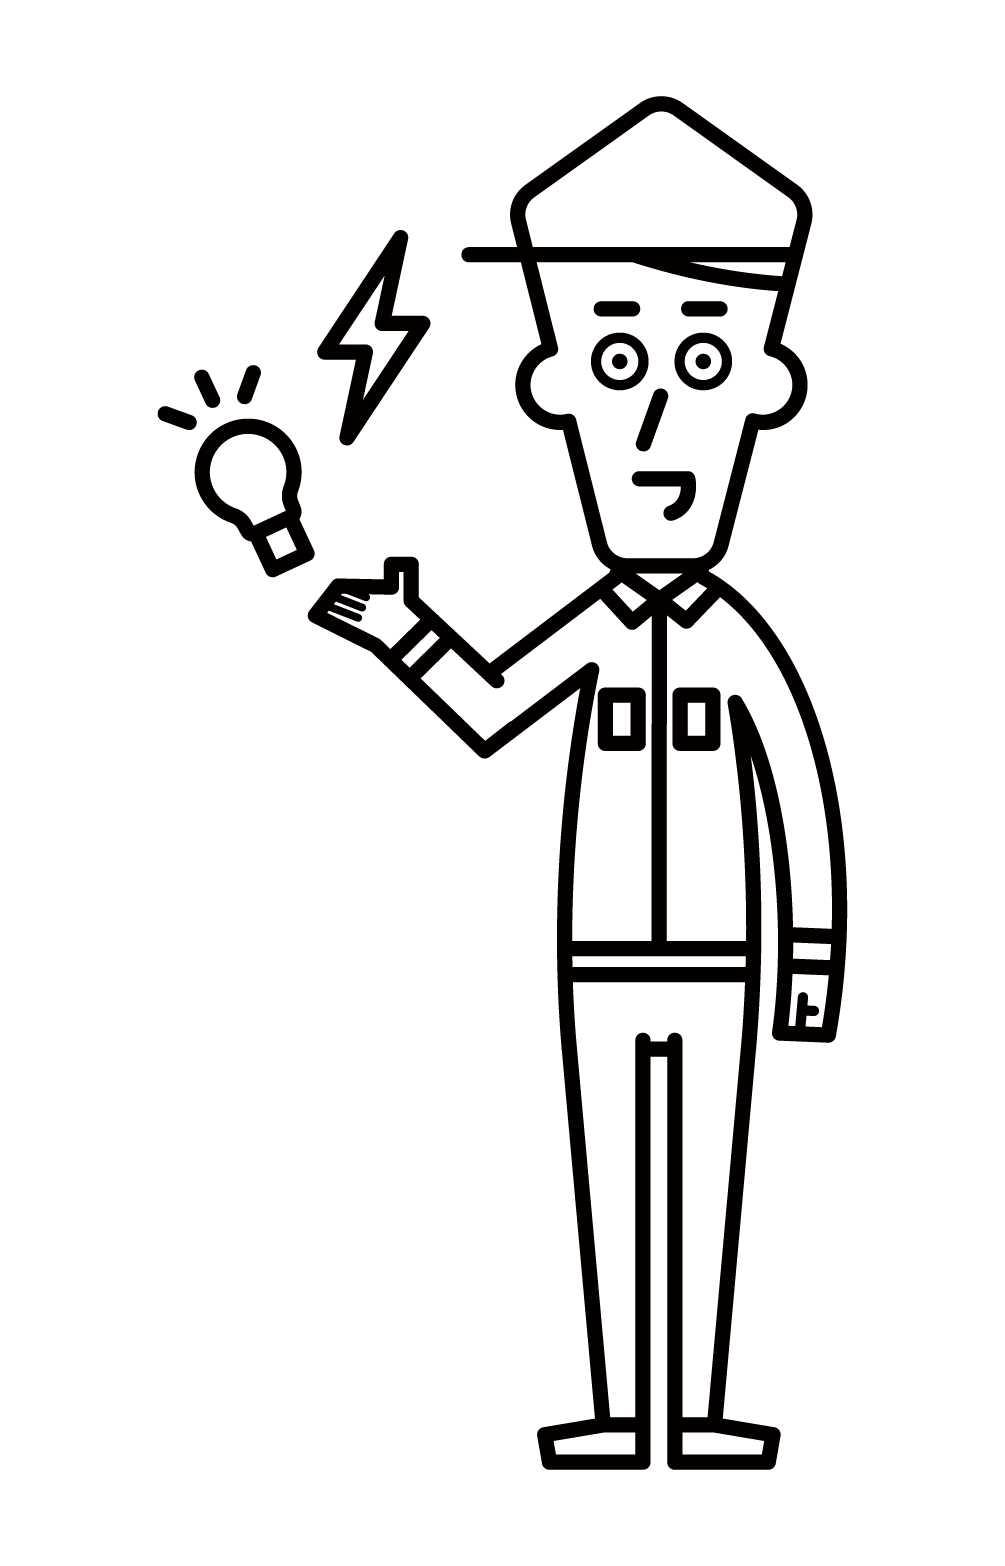 Illustration of an employee of a power company (male)